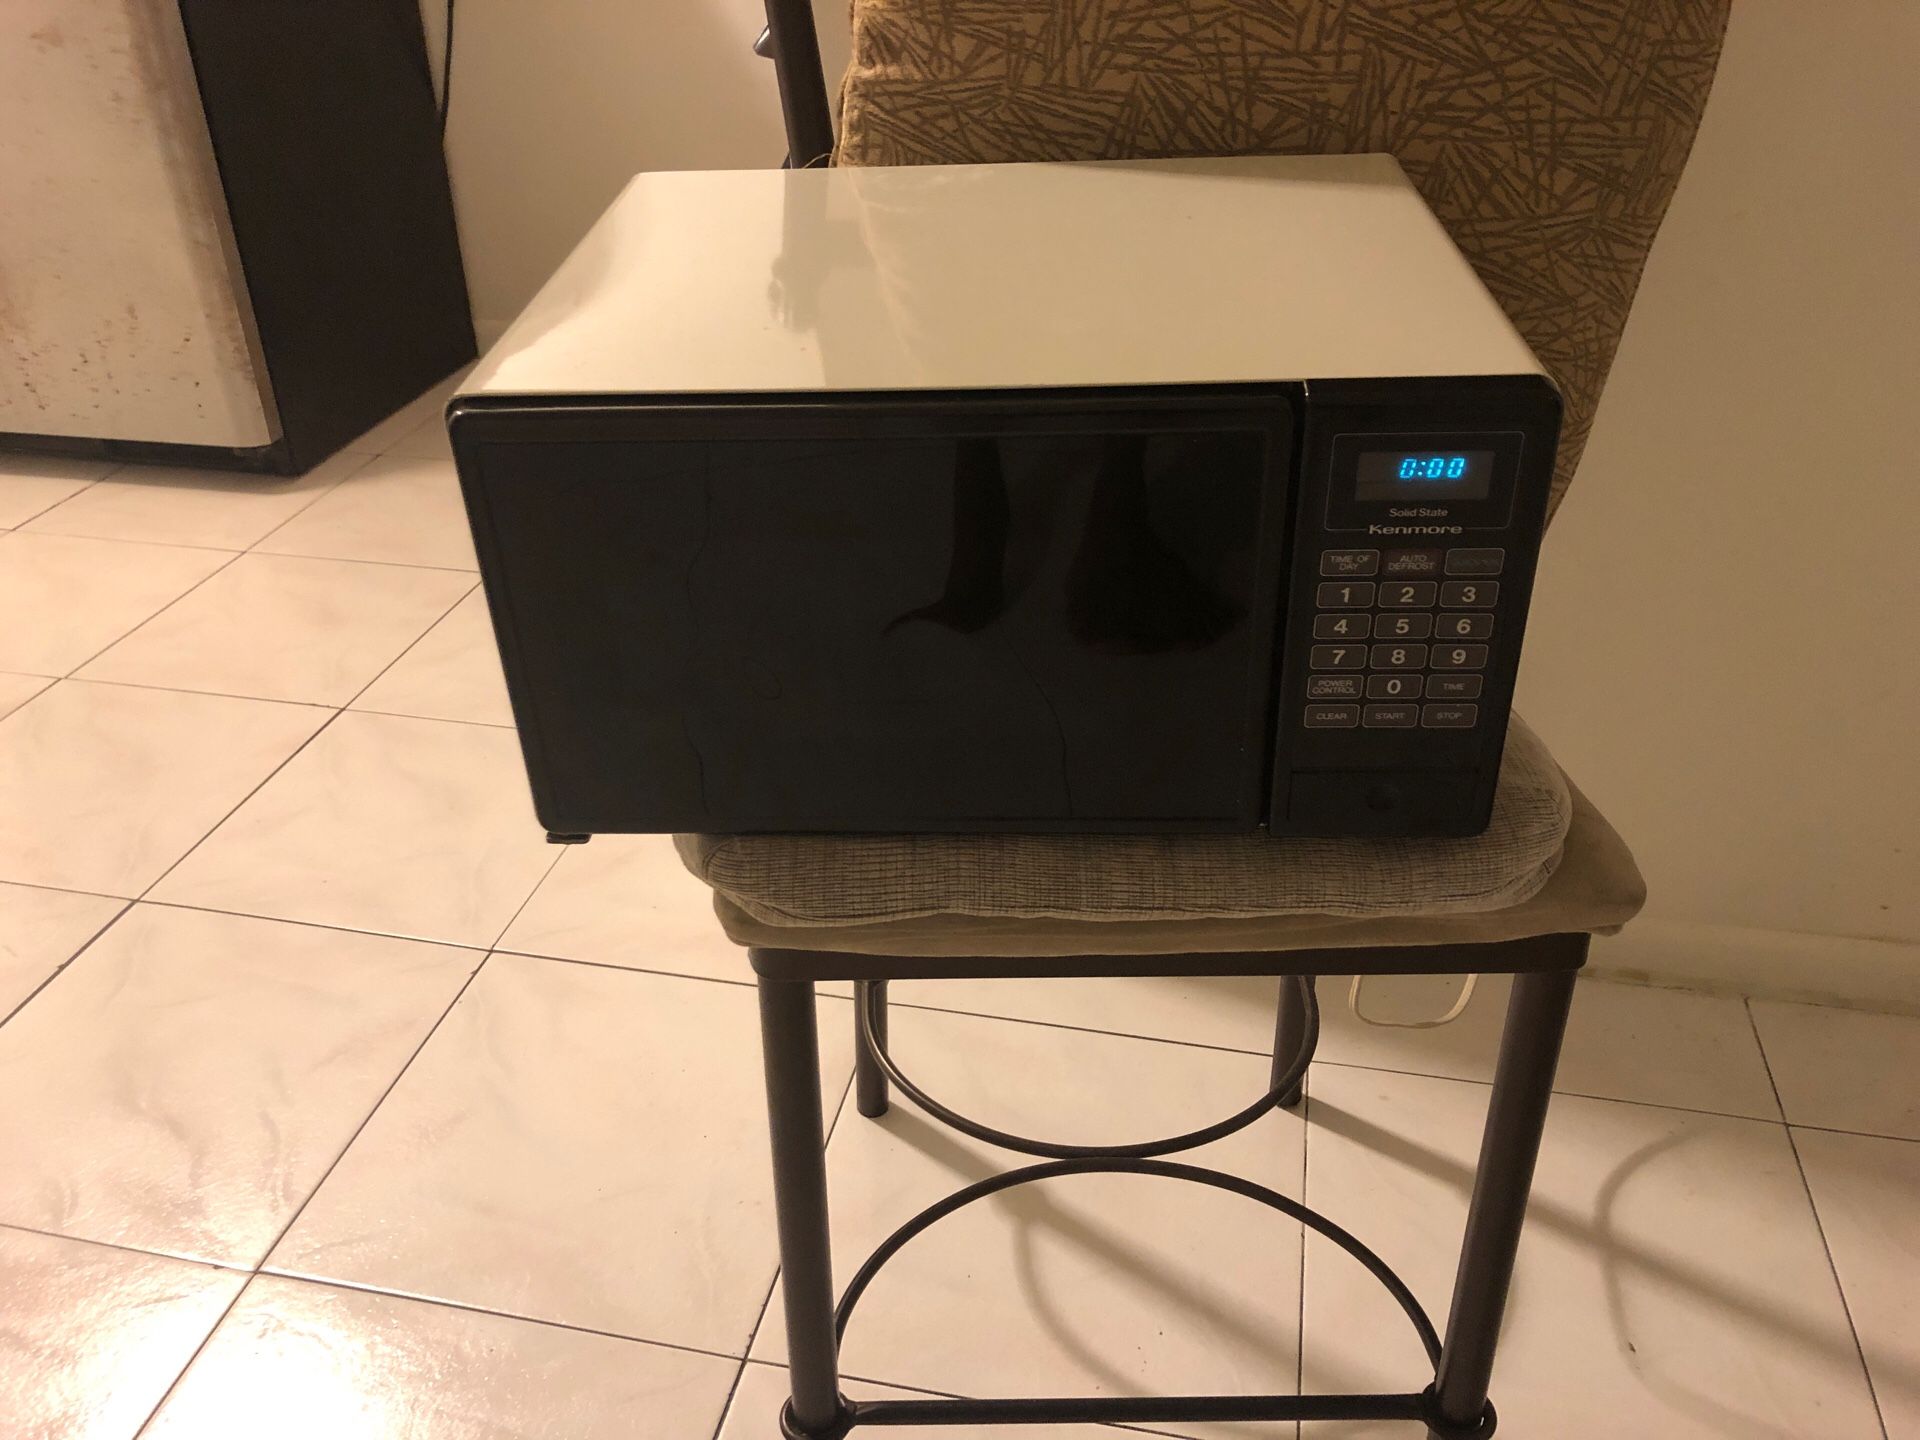 Microwave in excellent condition